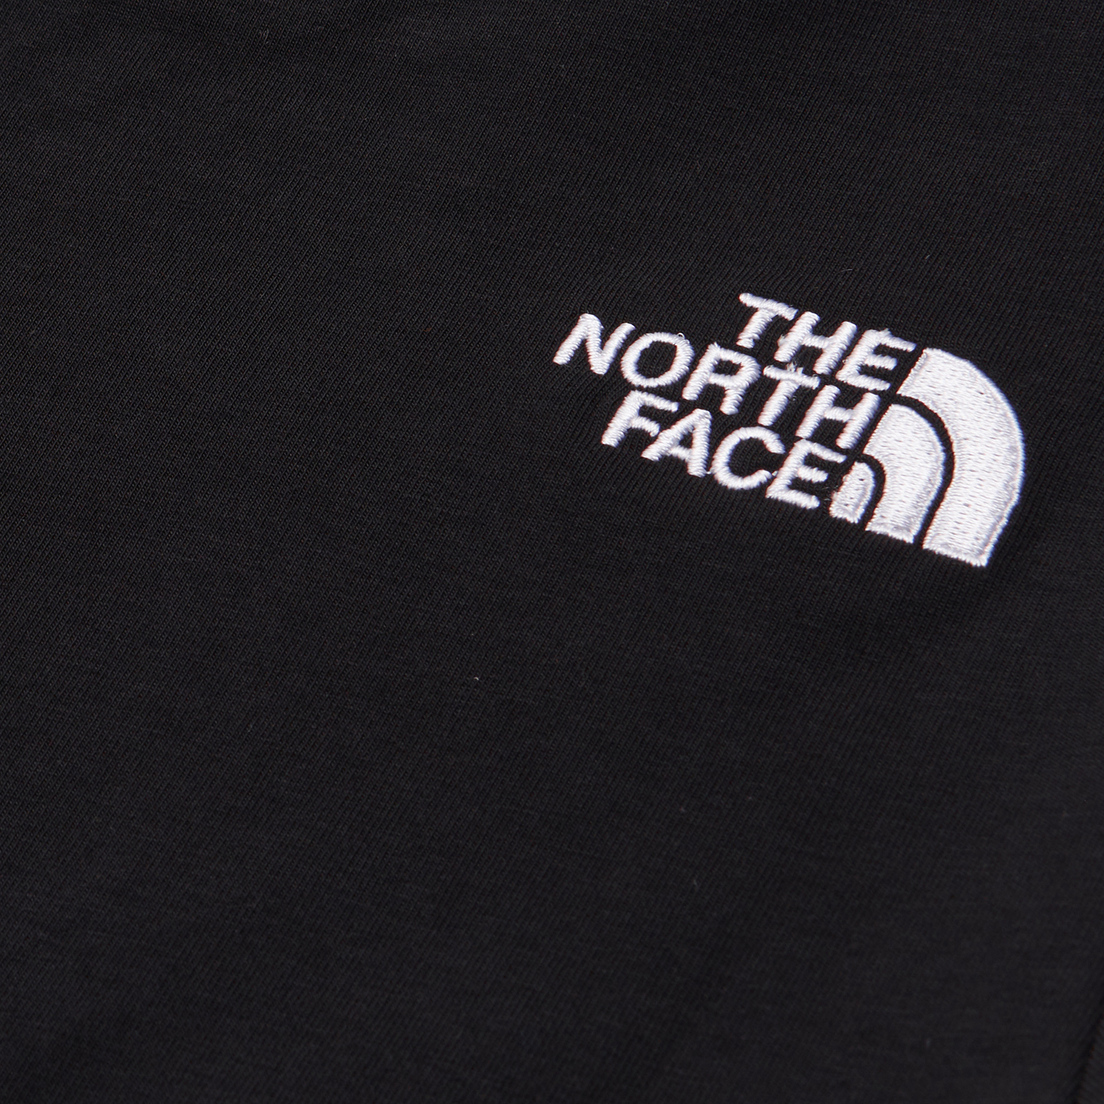 The North Face Женская футболка Cropped